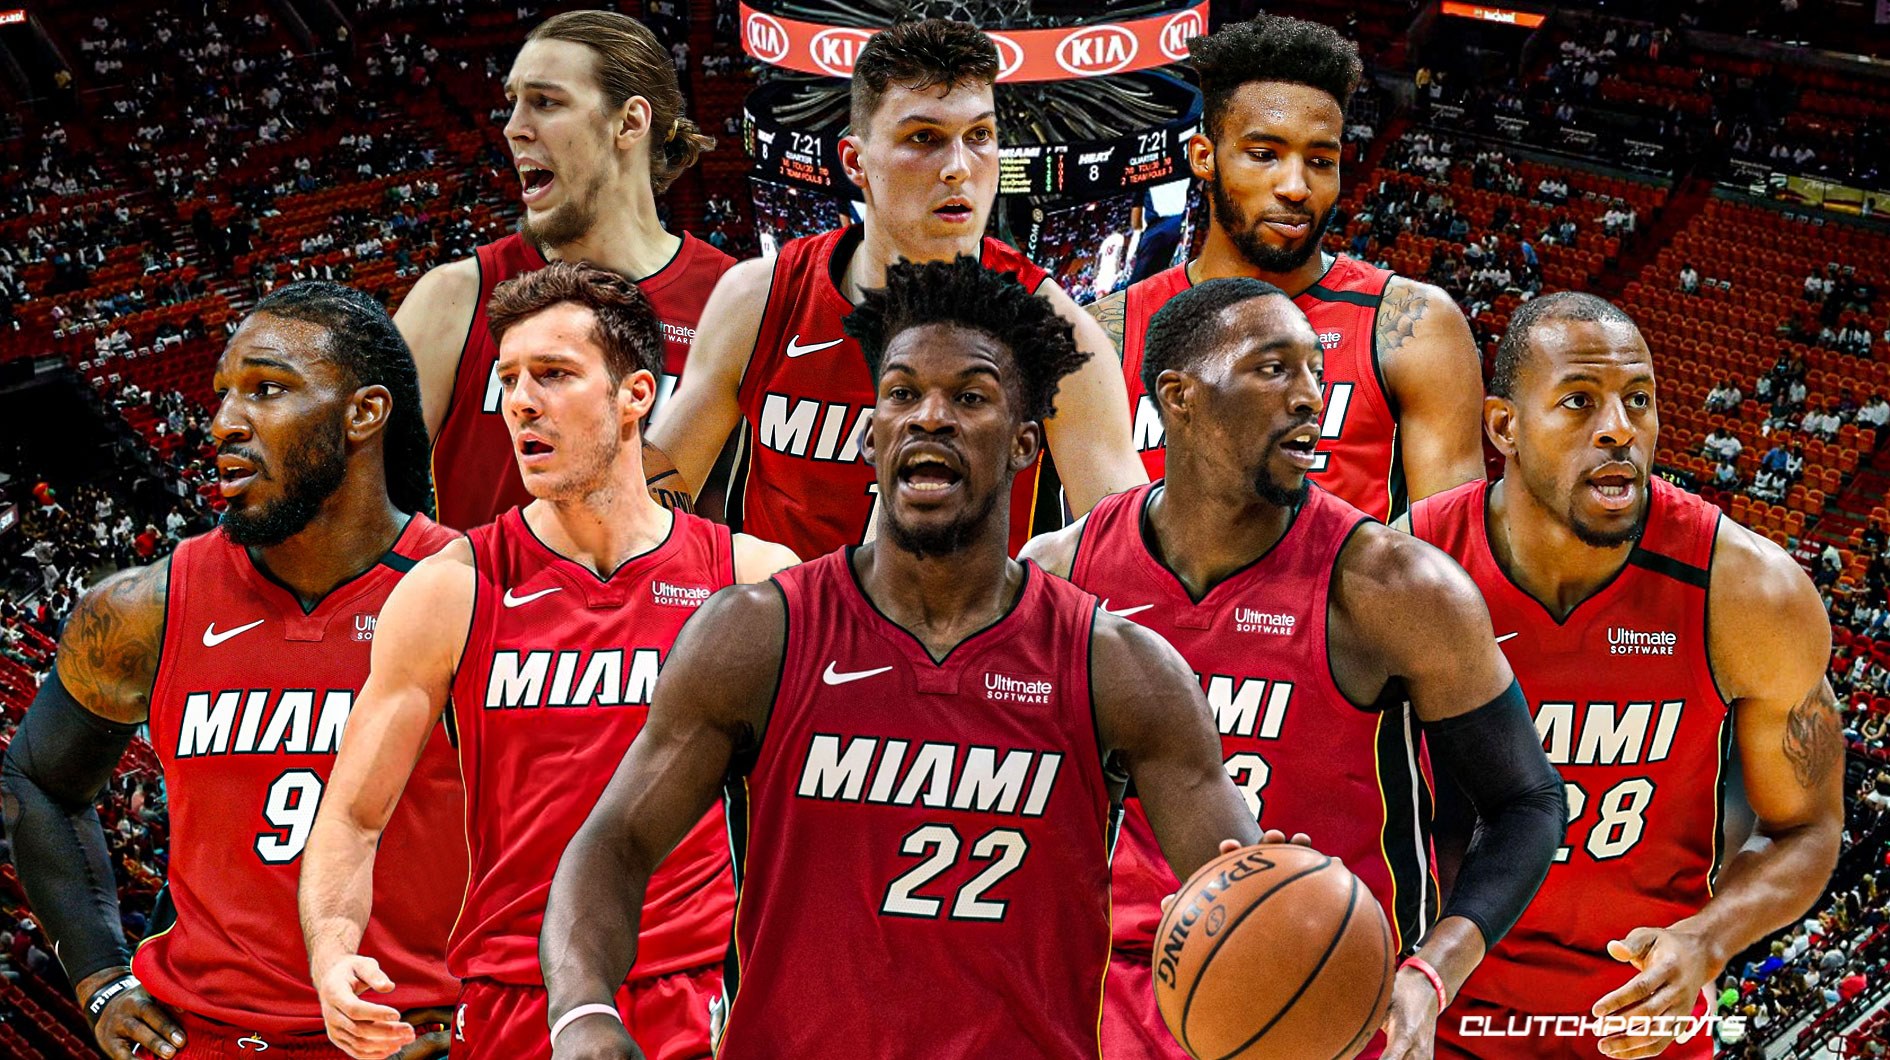 Miami Heat : Miami heat retire 'vice' uniforms after years of.